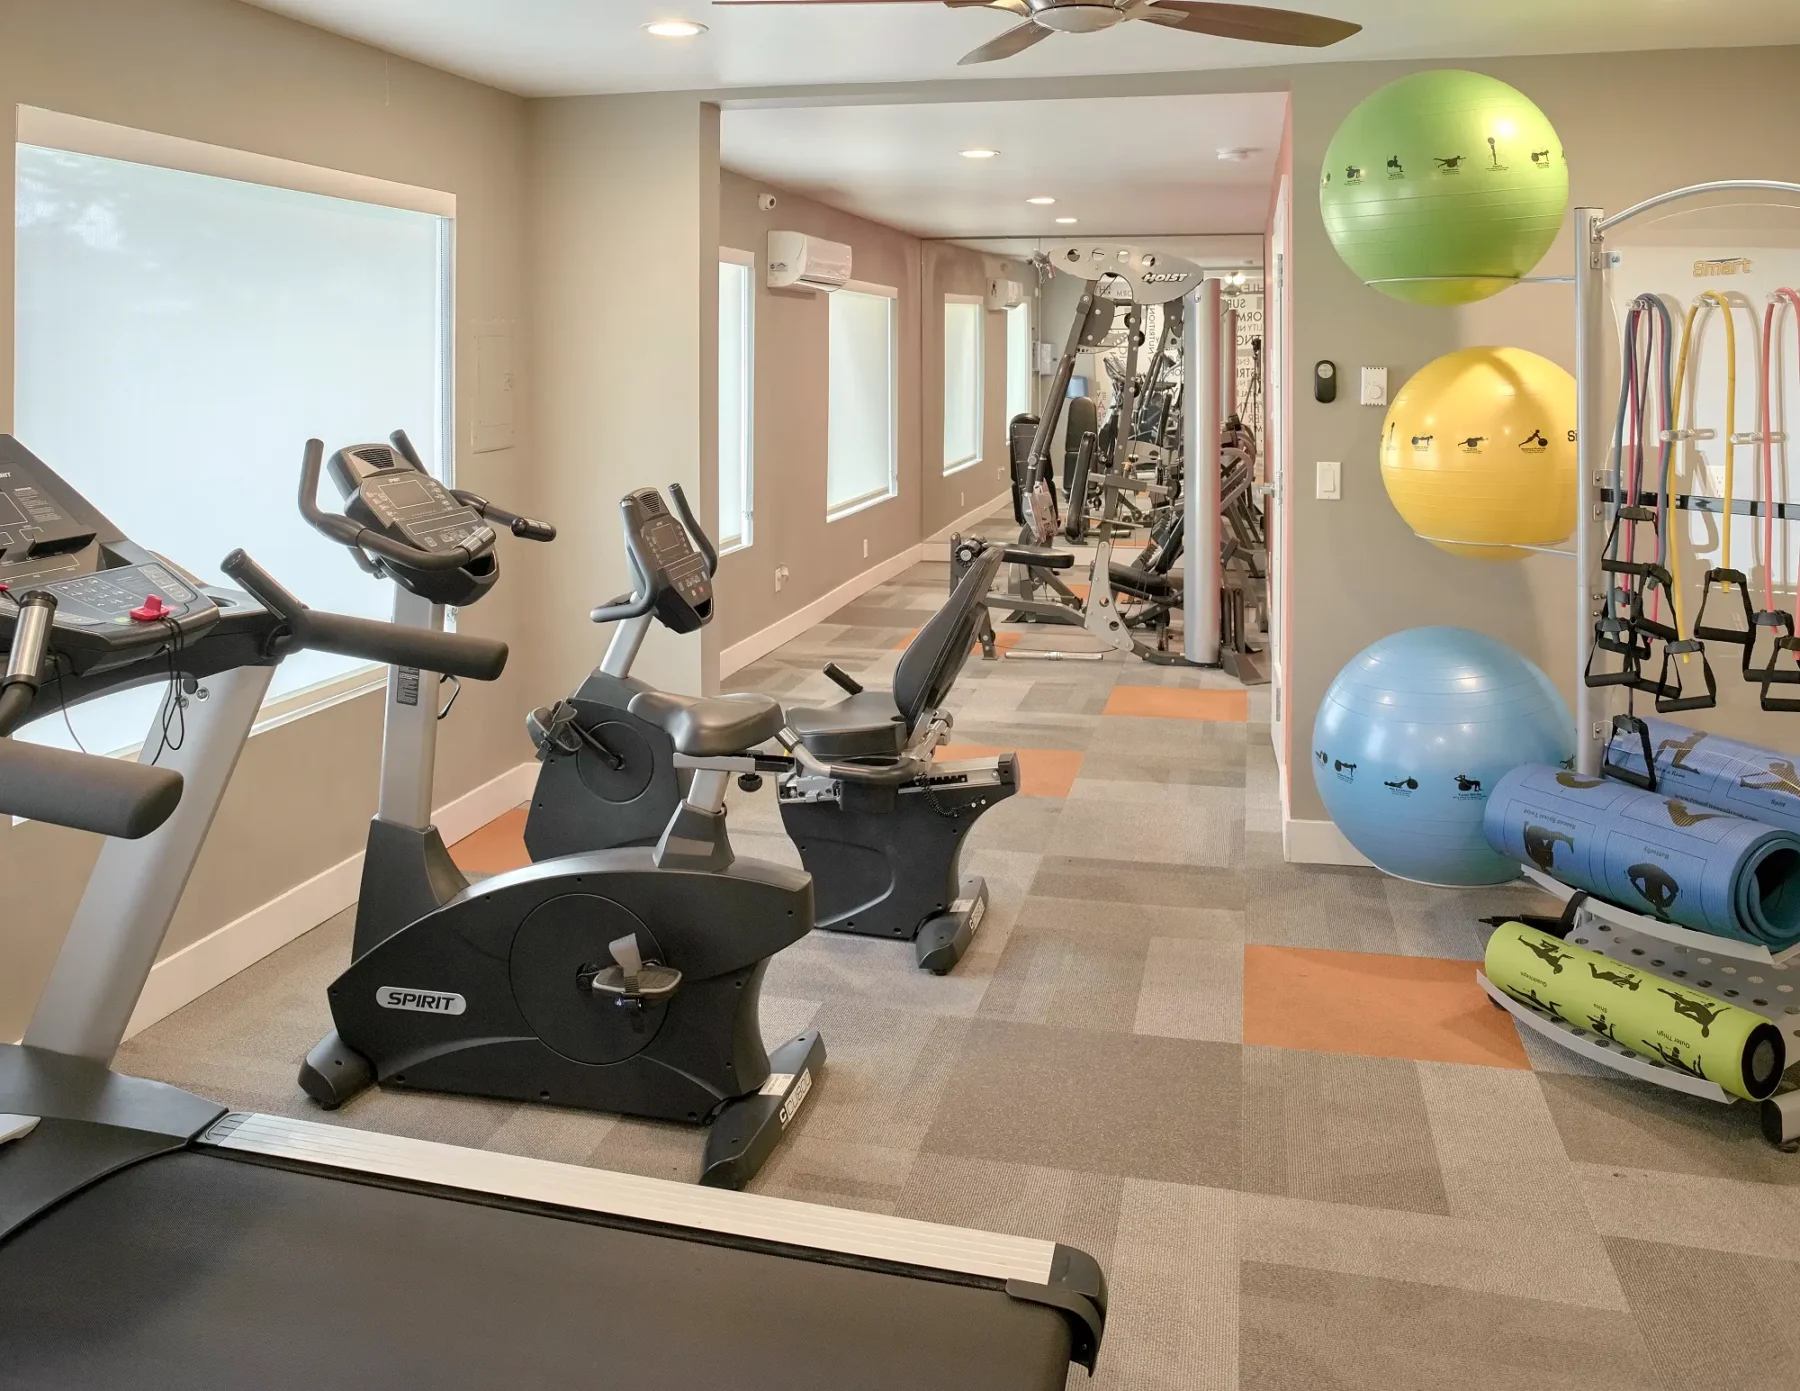 Irwin Park fitness center with gym machines and equipment.